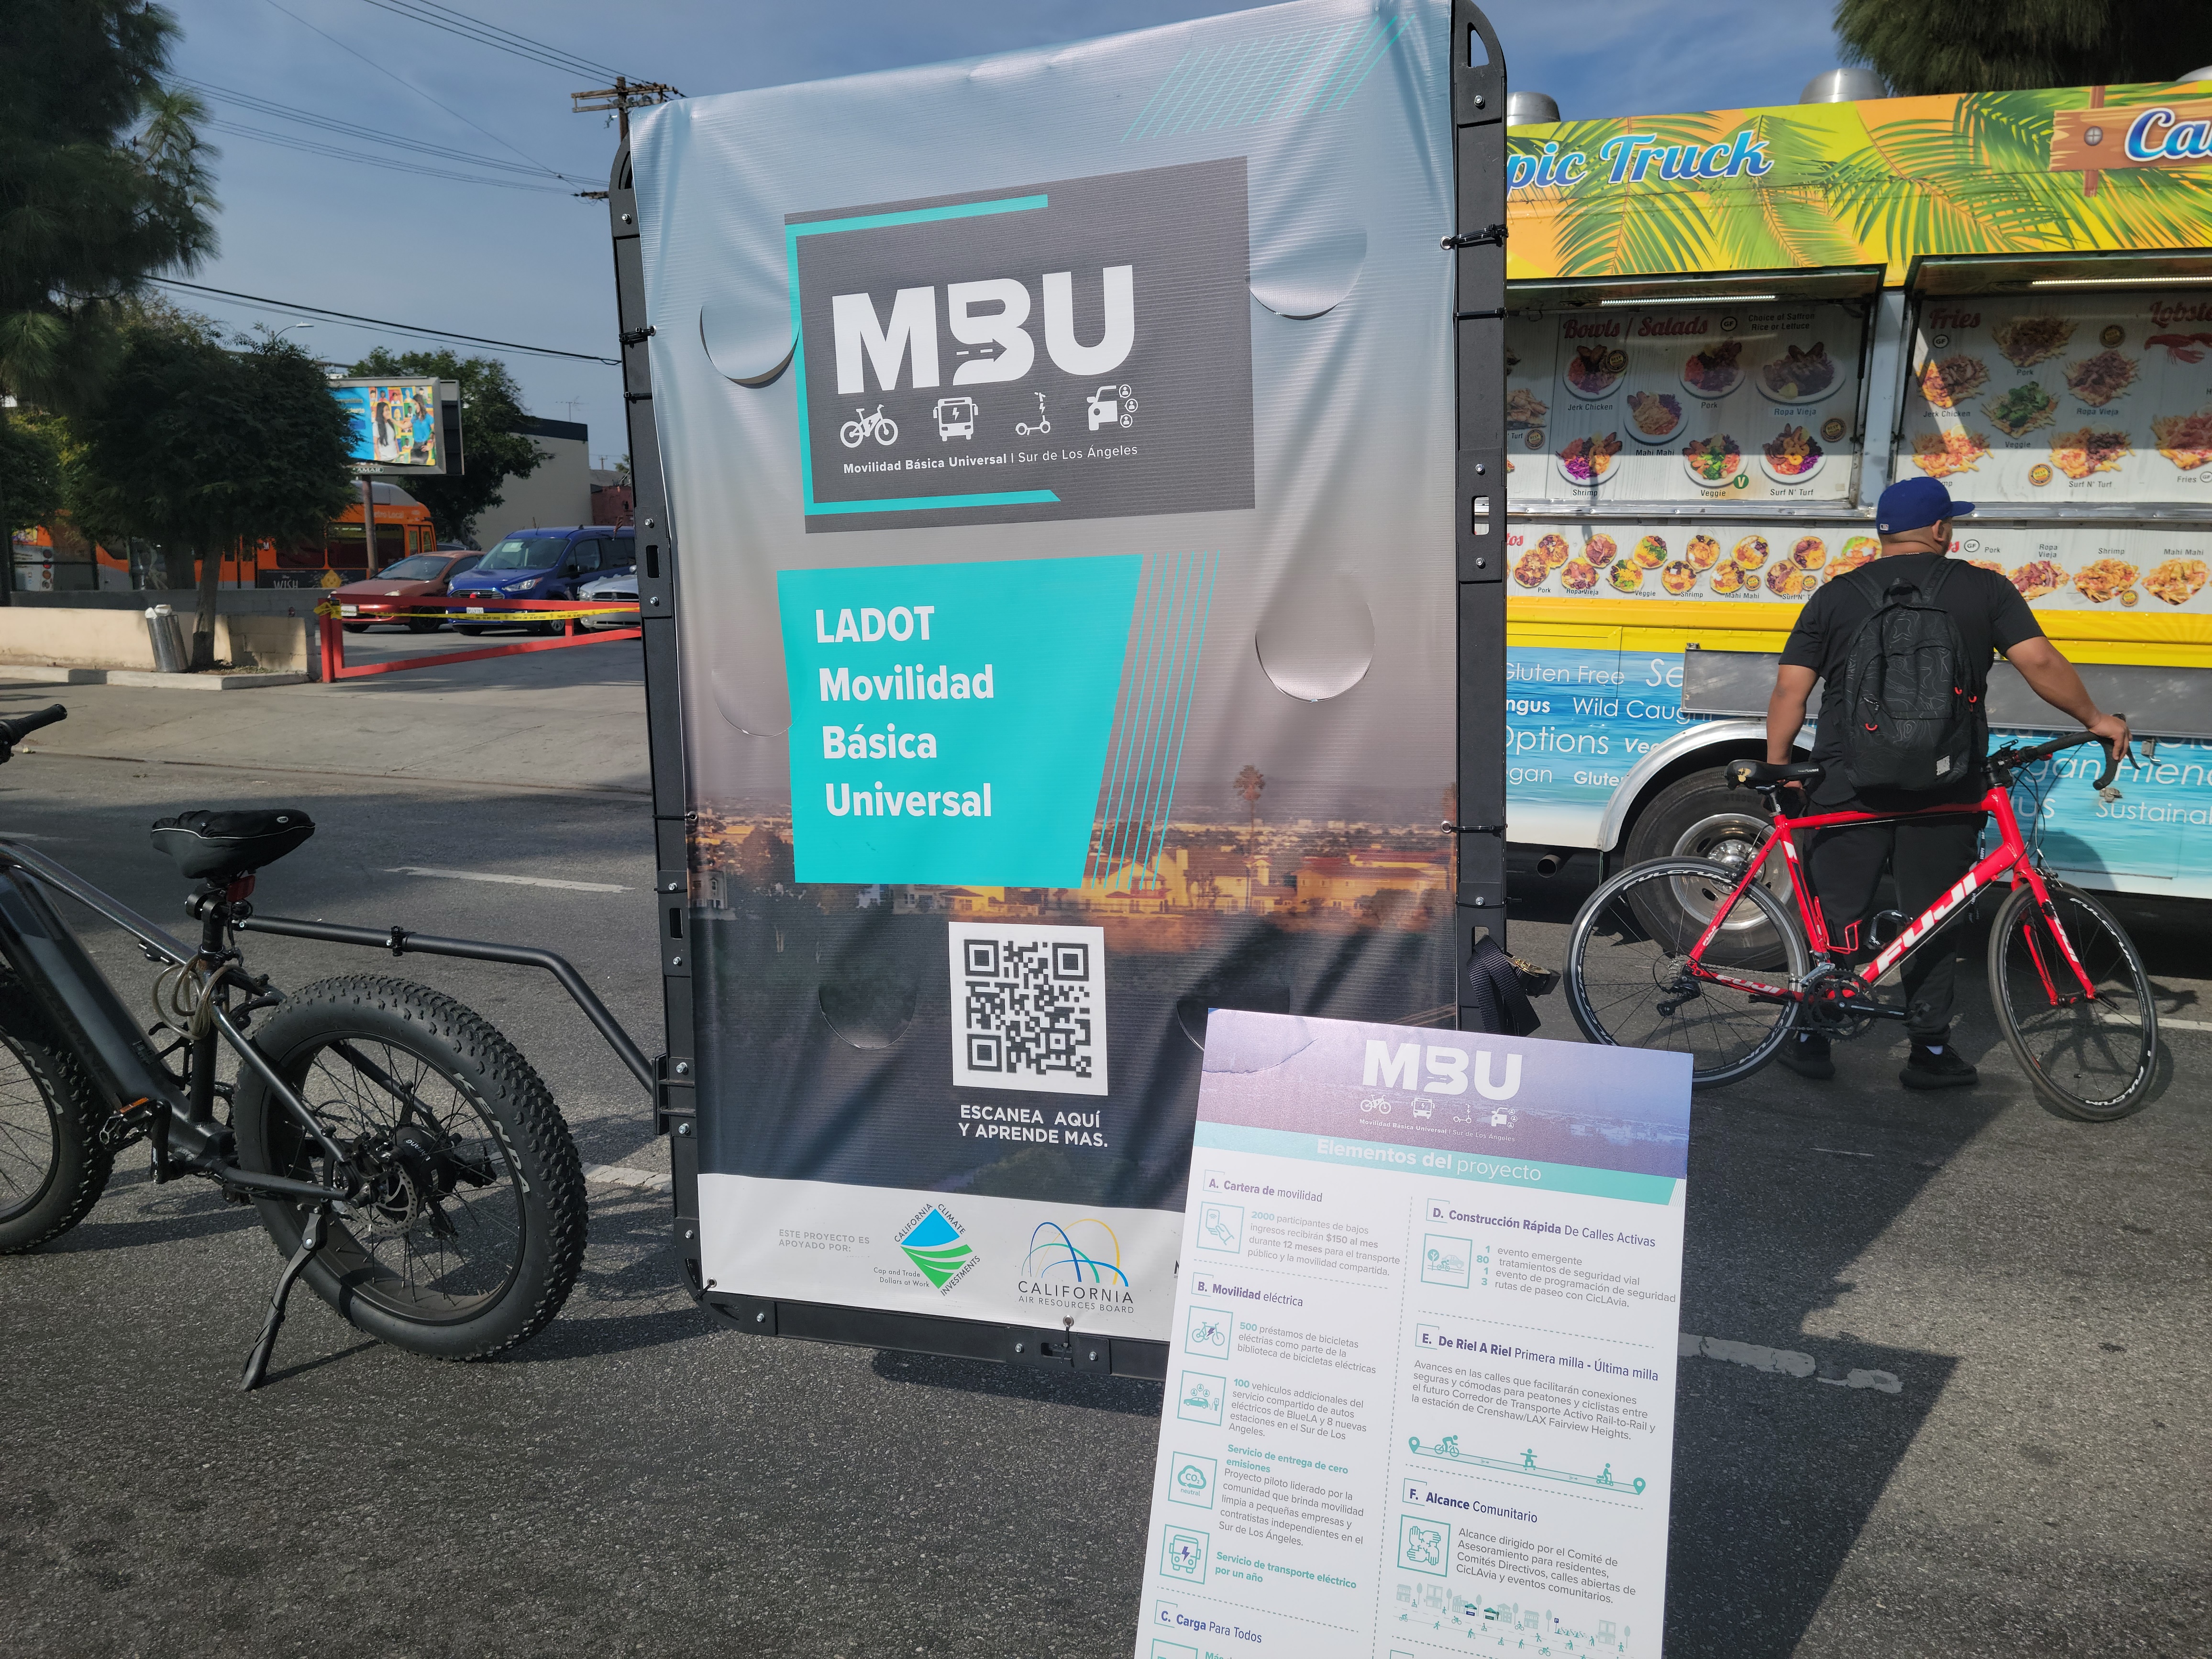 Black E bike pulling a mobile banner with Mobilidad Basico Universal in front of a food truck and a man on a red bicycle